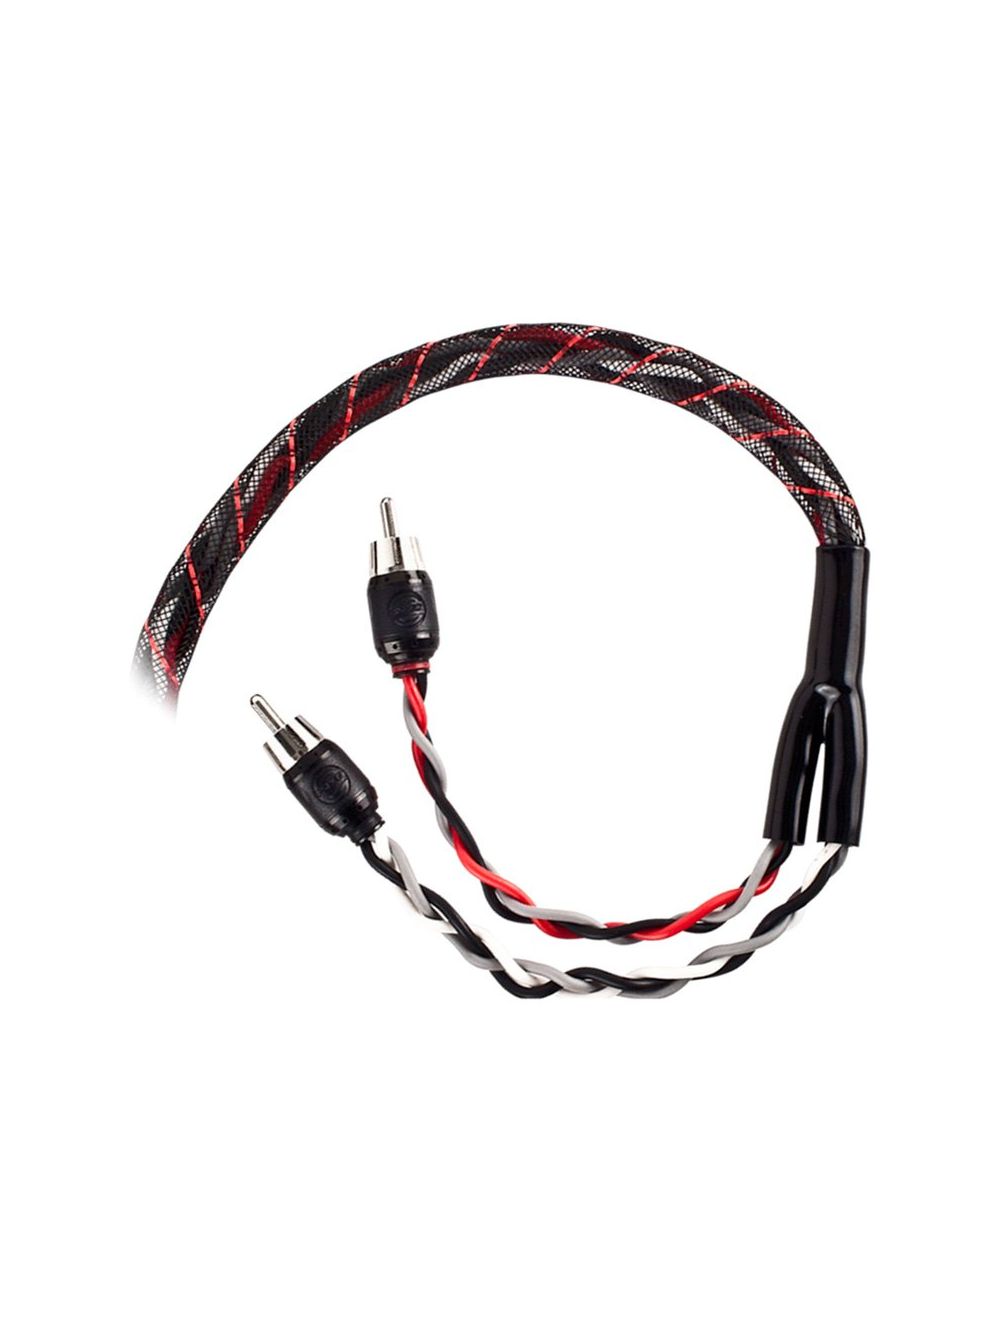 T-Spec V12RY2 Tspec RCA v12 Series 2-Channel Audio Cable - 1M-2F